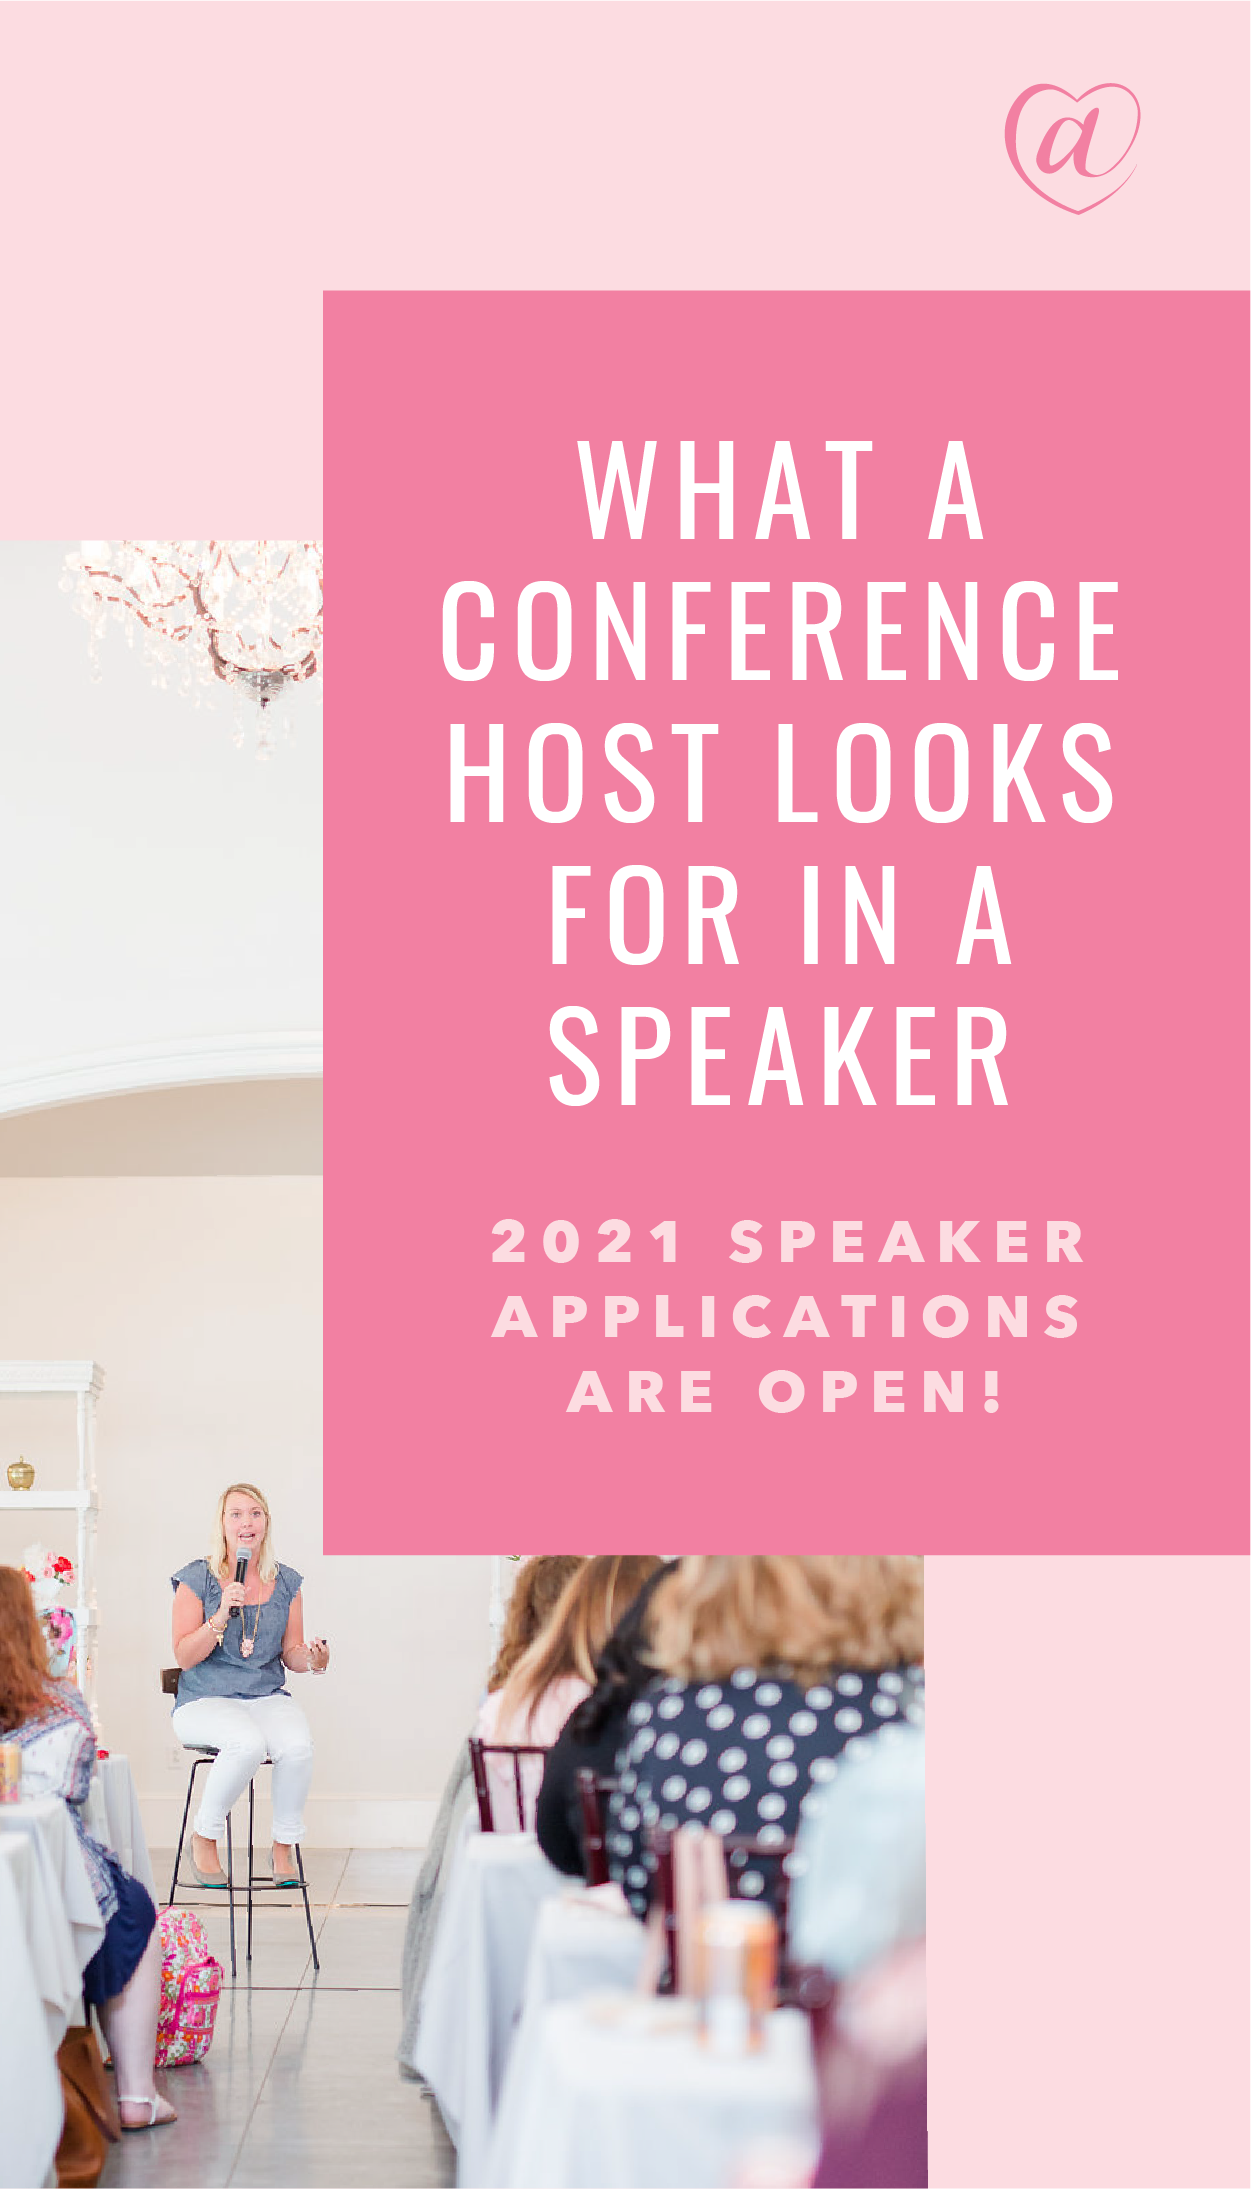 What a Conference Host Looks for in a Speaker 2021 // Creative at Heart #conference #inpersonretreat #hosting #herestothecreatives